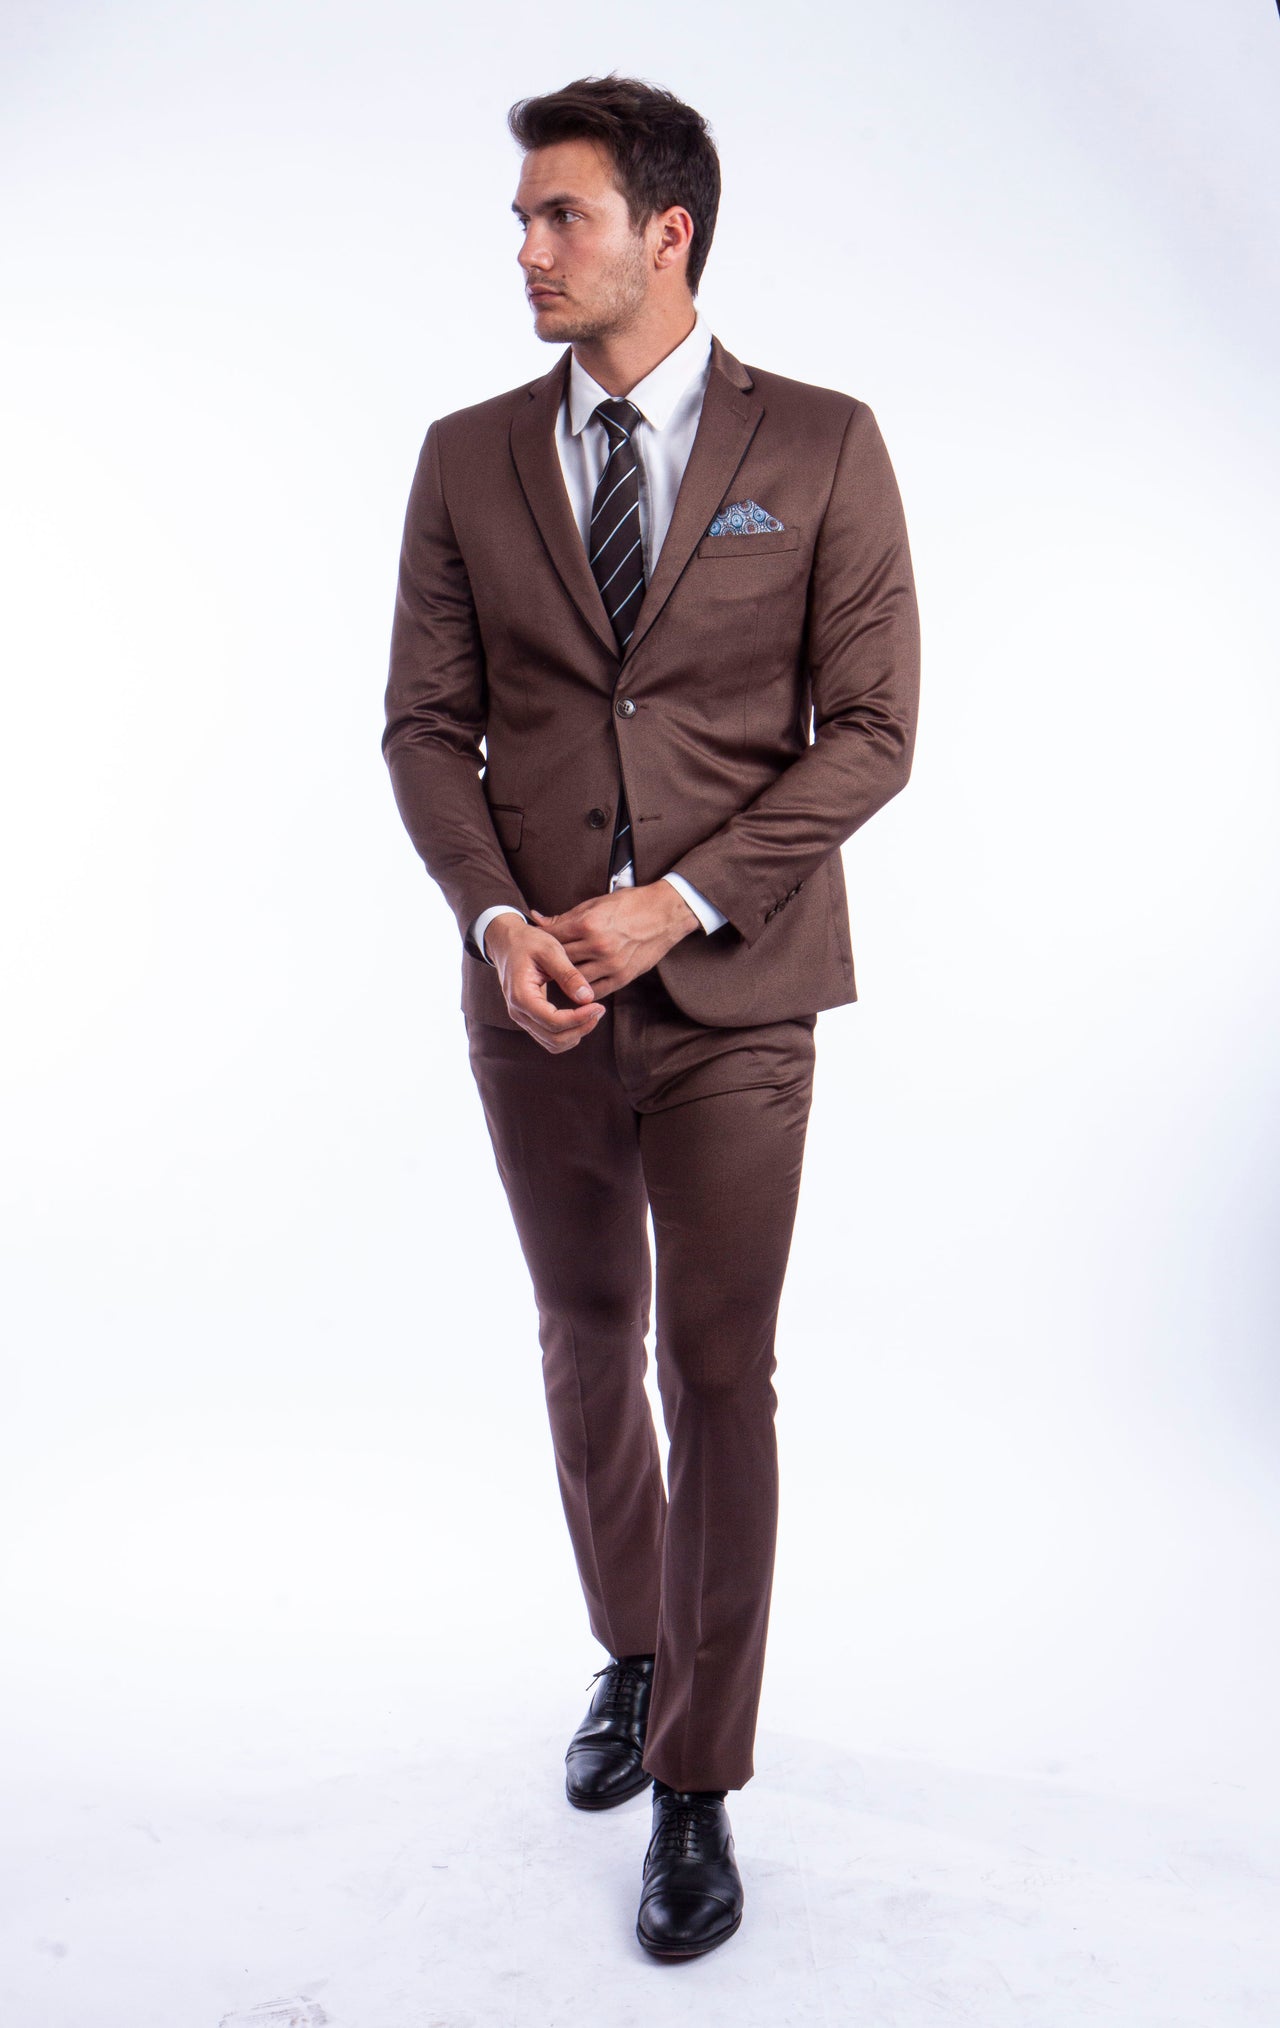 Brown Suit For Men Formal Suits For All Ocassions - Hattitude